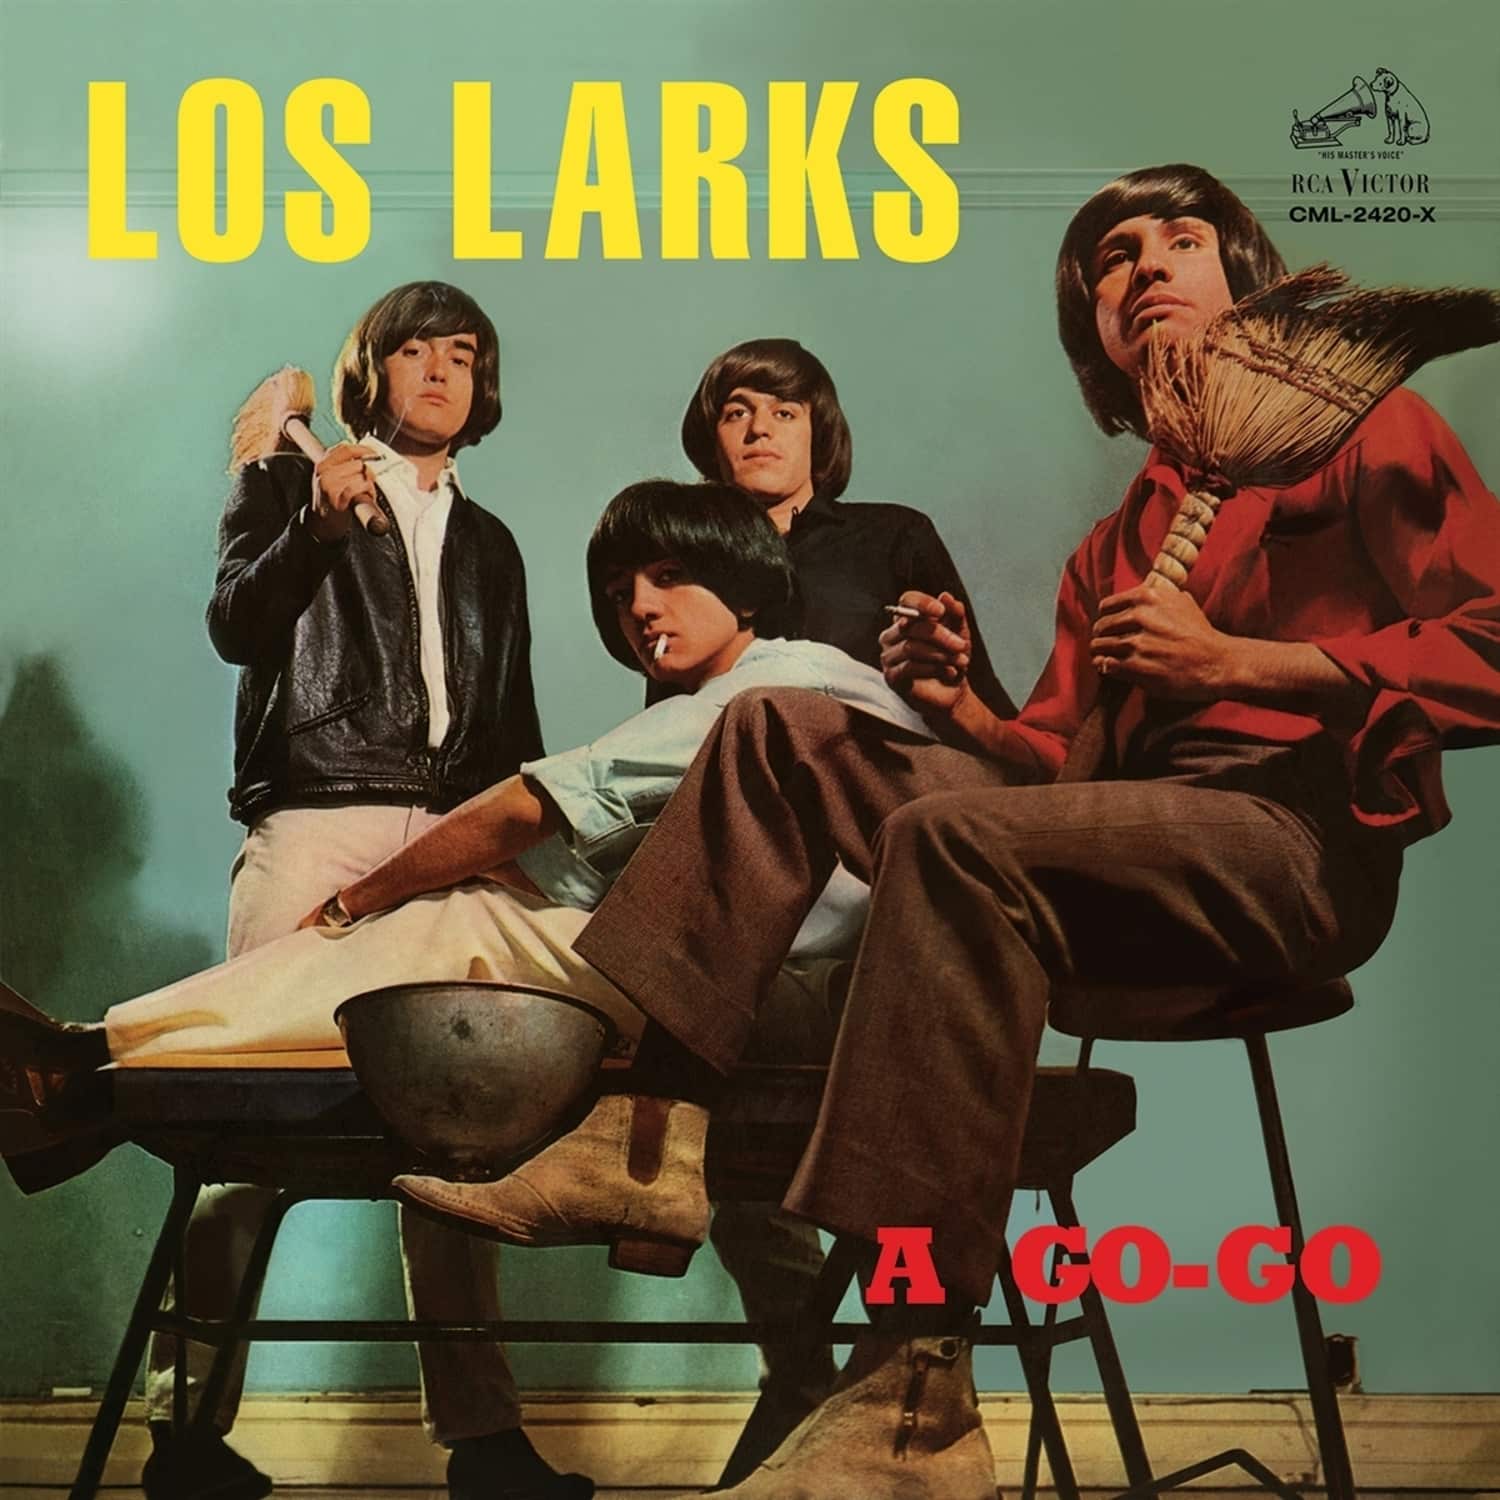  Los Larks - A GO GO 